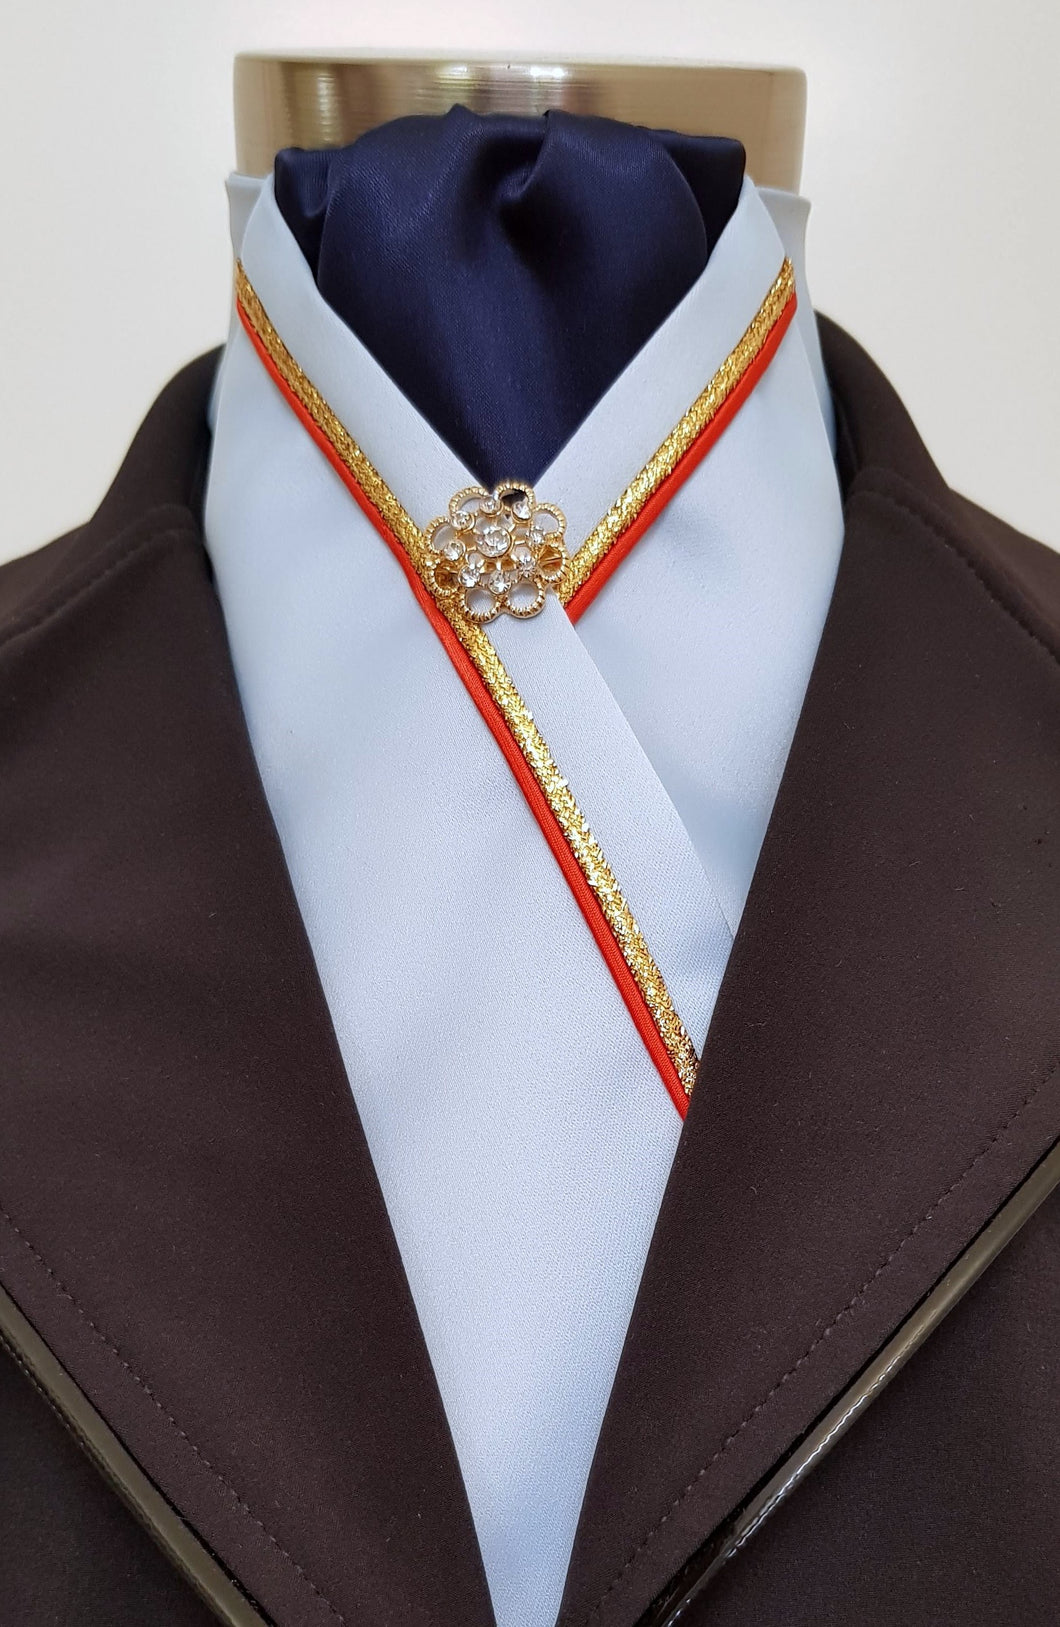 ERA RACHAEL STOCK TIE - Pale blue satin, navy, red & gold piping & brooch